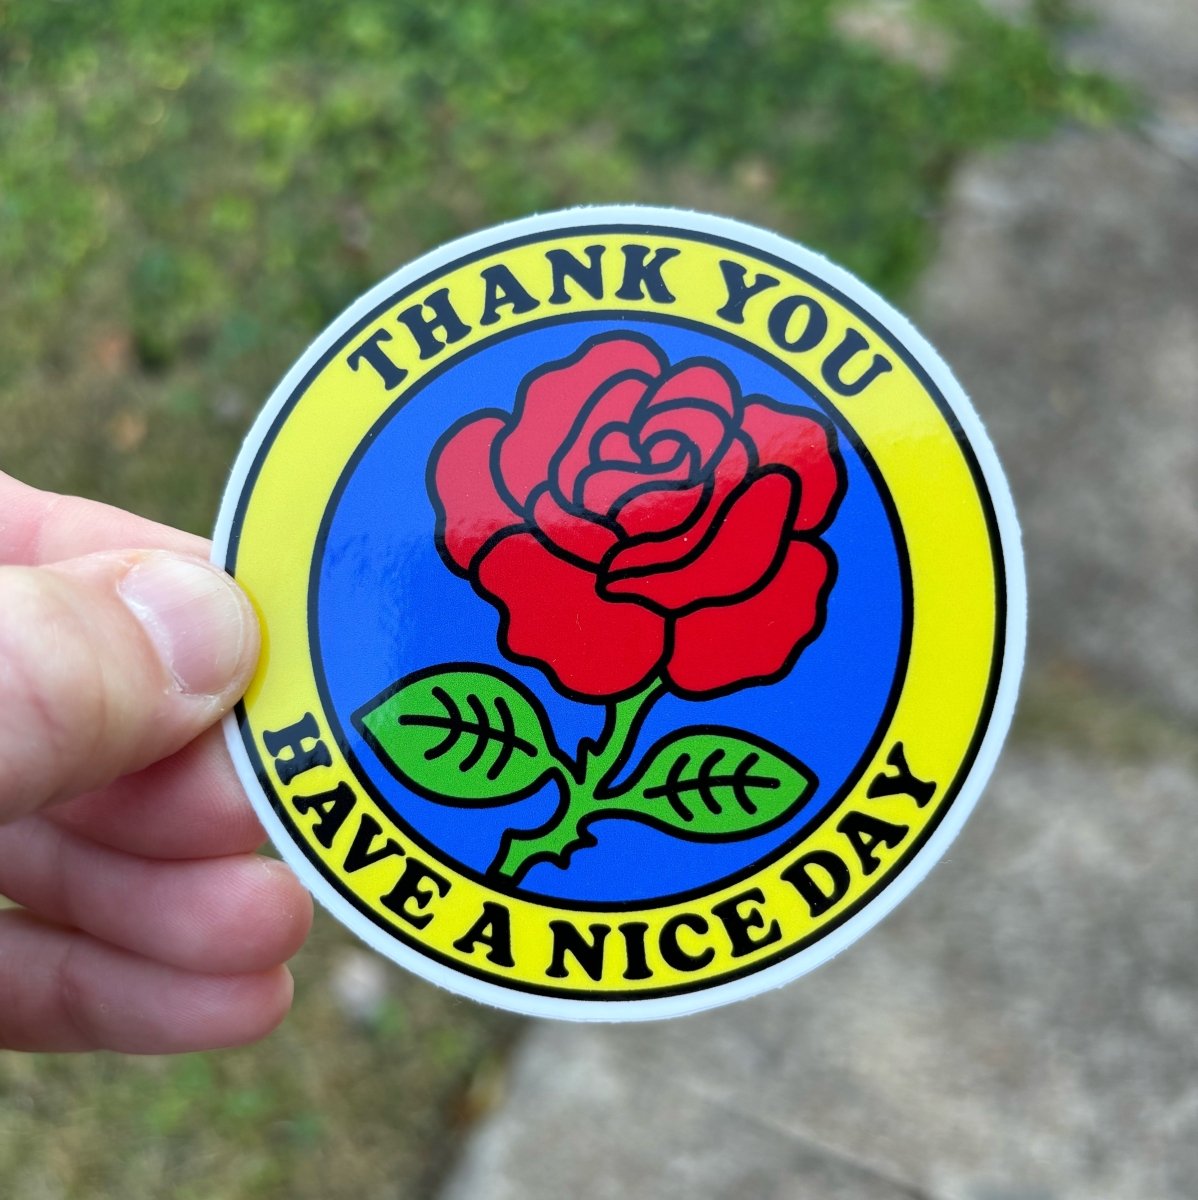 Thank you have a nice day sticker - Sticker - Pretty Bad Co.